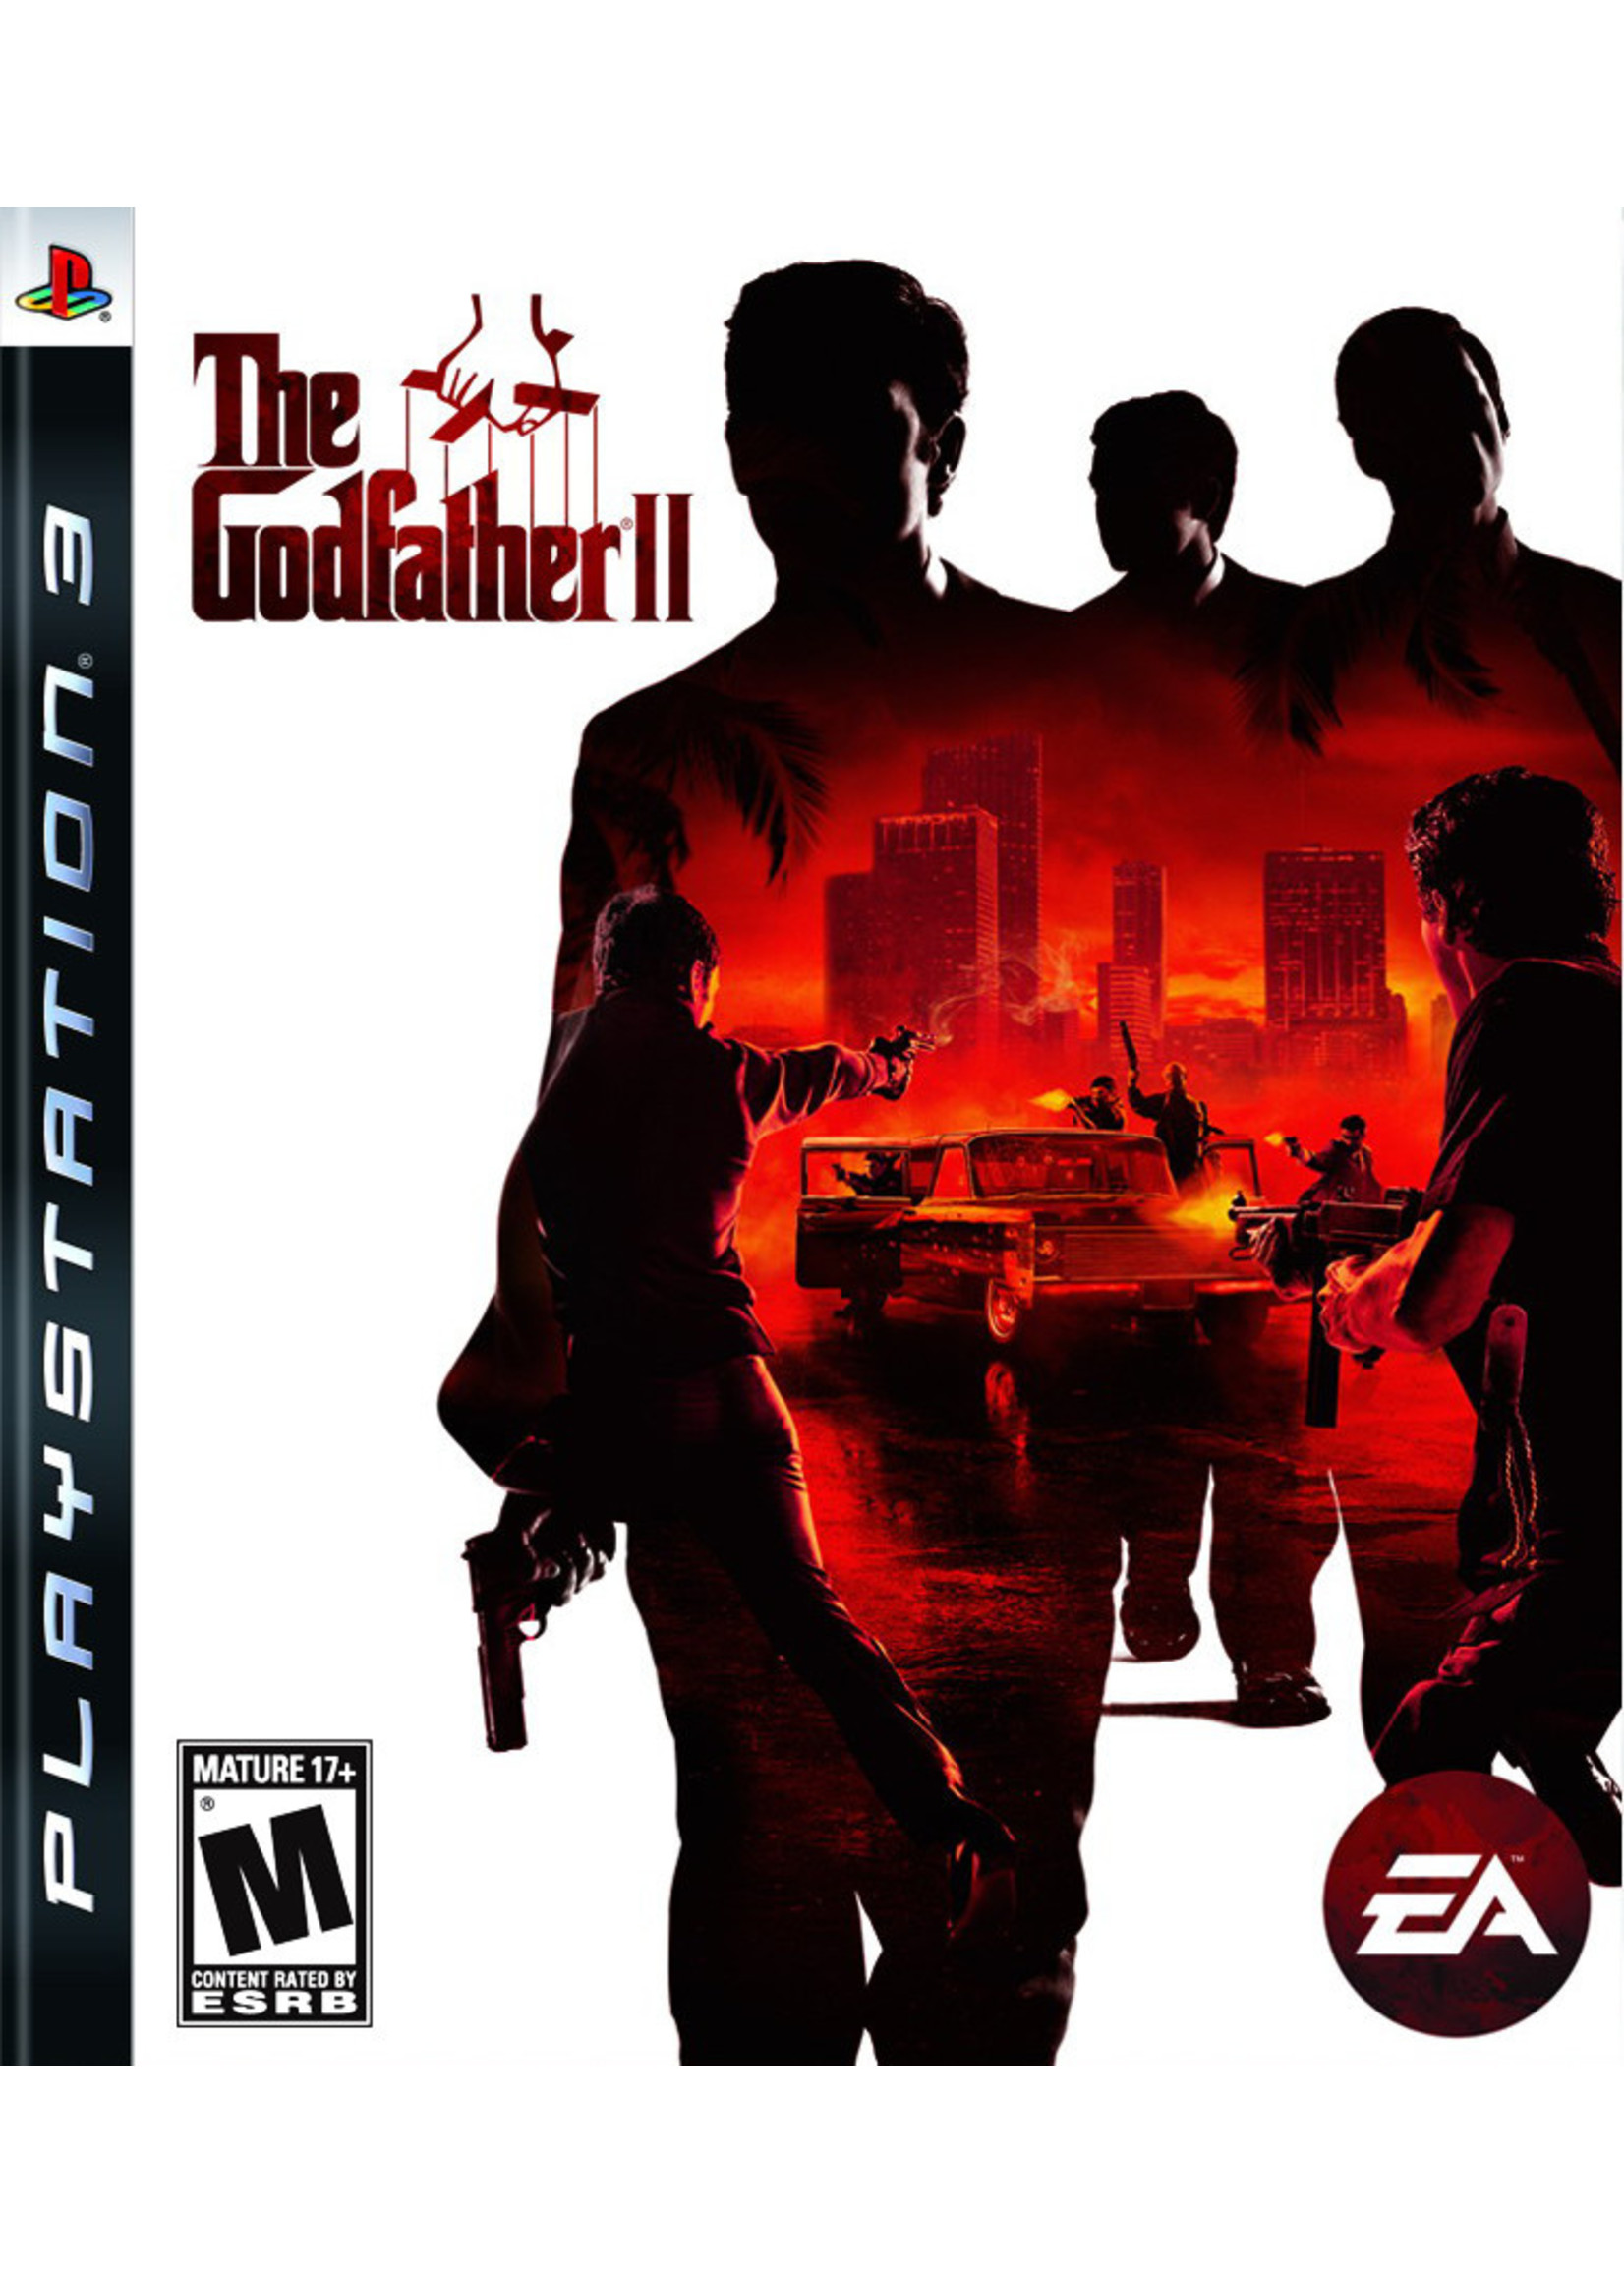 Sony Playstation 3 (PS3) Godfather II, The